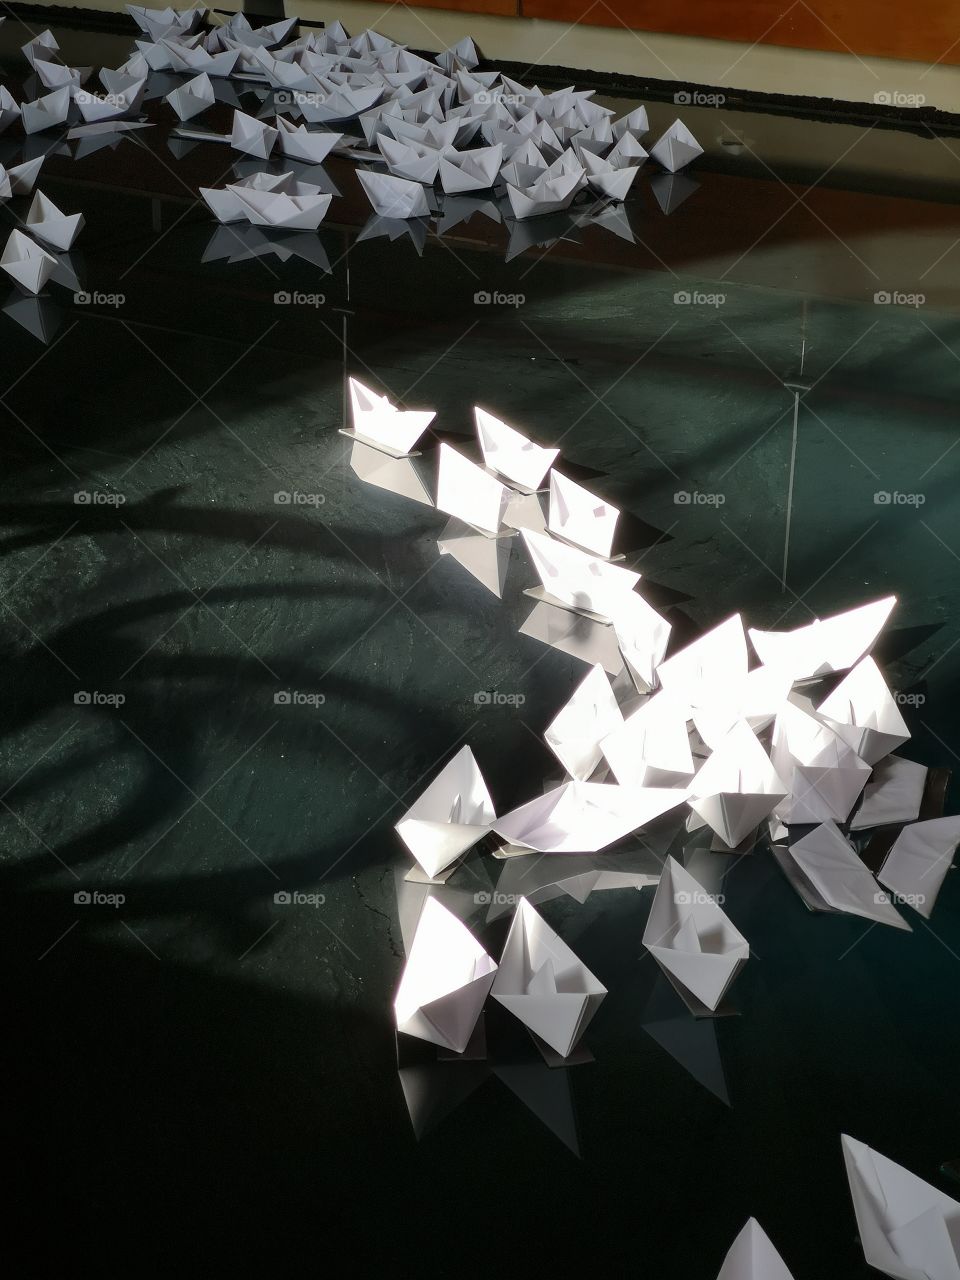 paper boats on water